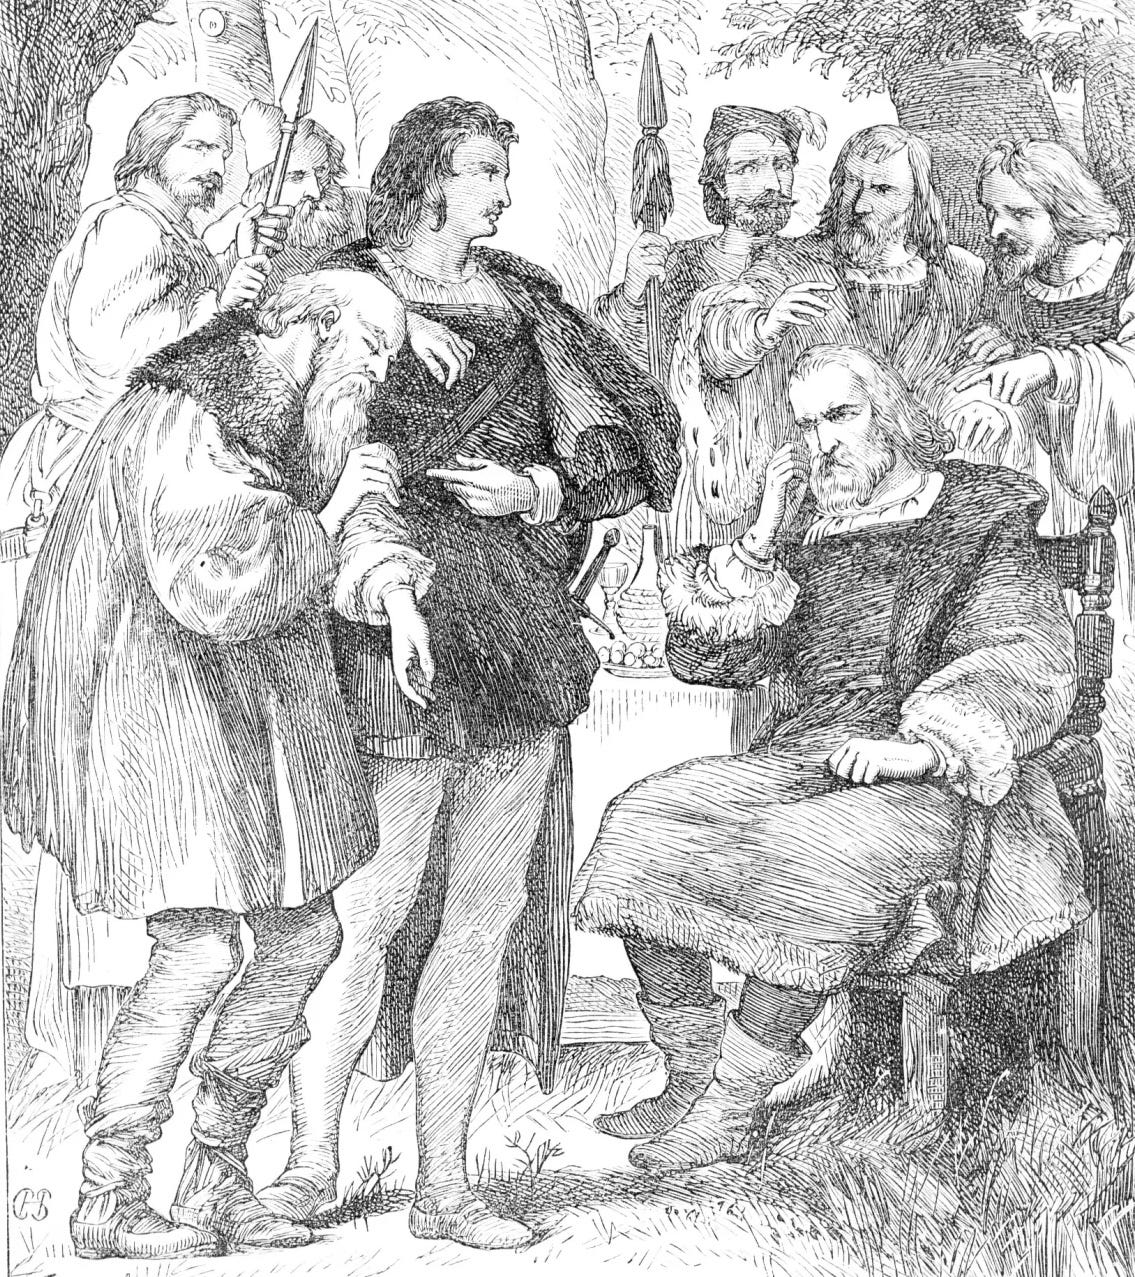 A Victorian etching of a group of men. Orlando, a young man, supports Adam an old man, who leans weakly against him as others look on.